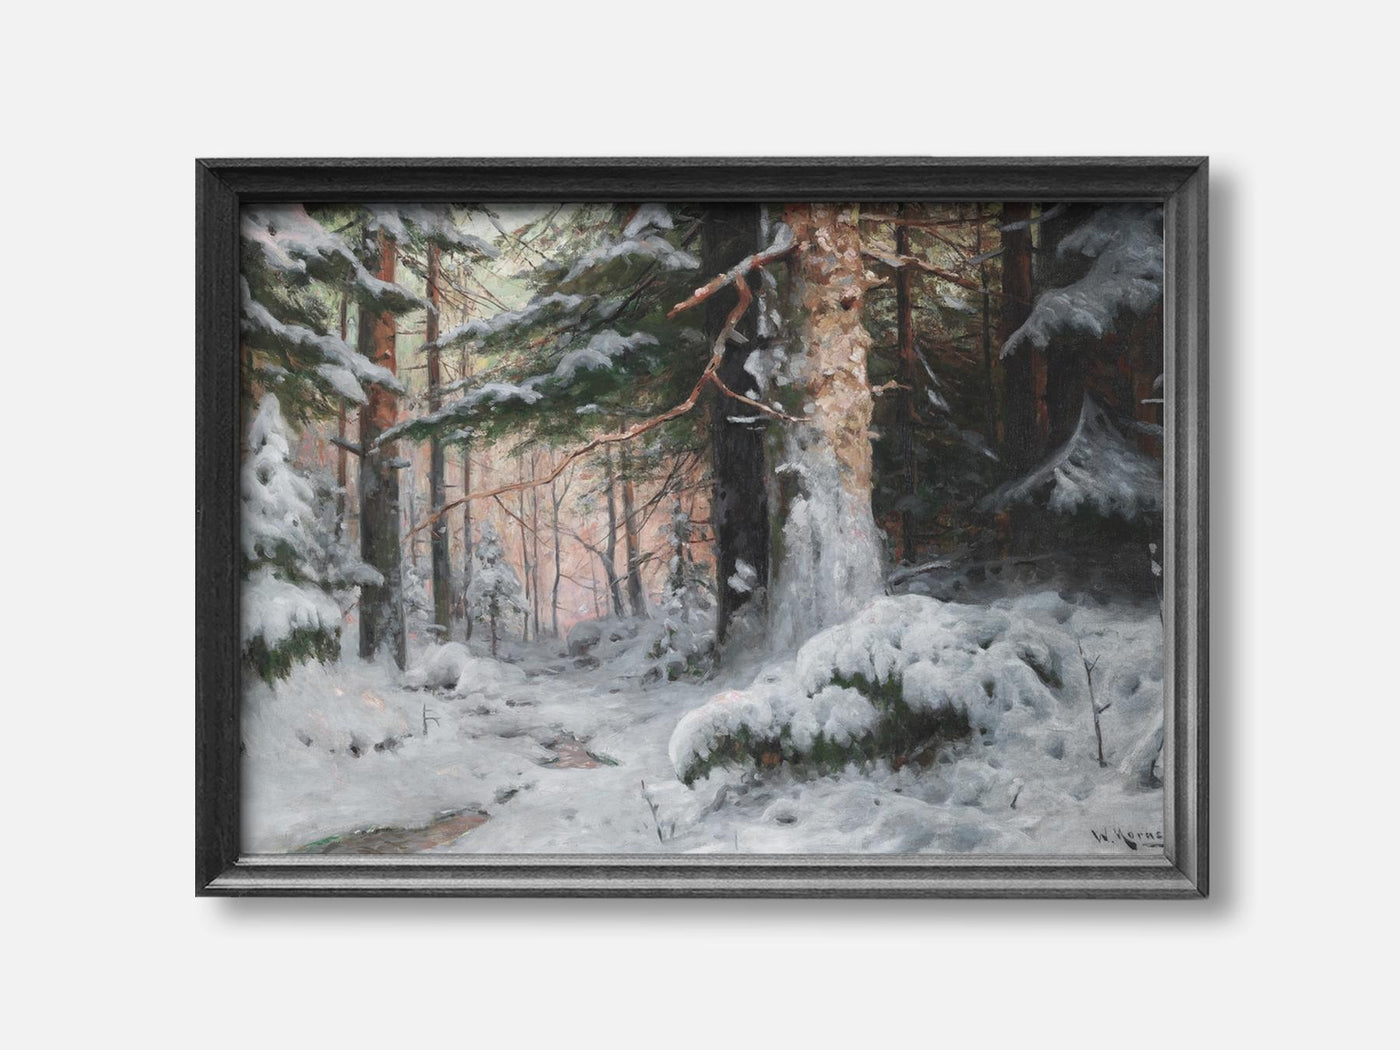 The Snowy Pine Forest mockup - A_w31-V1-PC_F+B-SS_1-PS_5x7-C_def variant